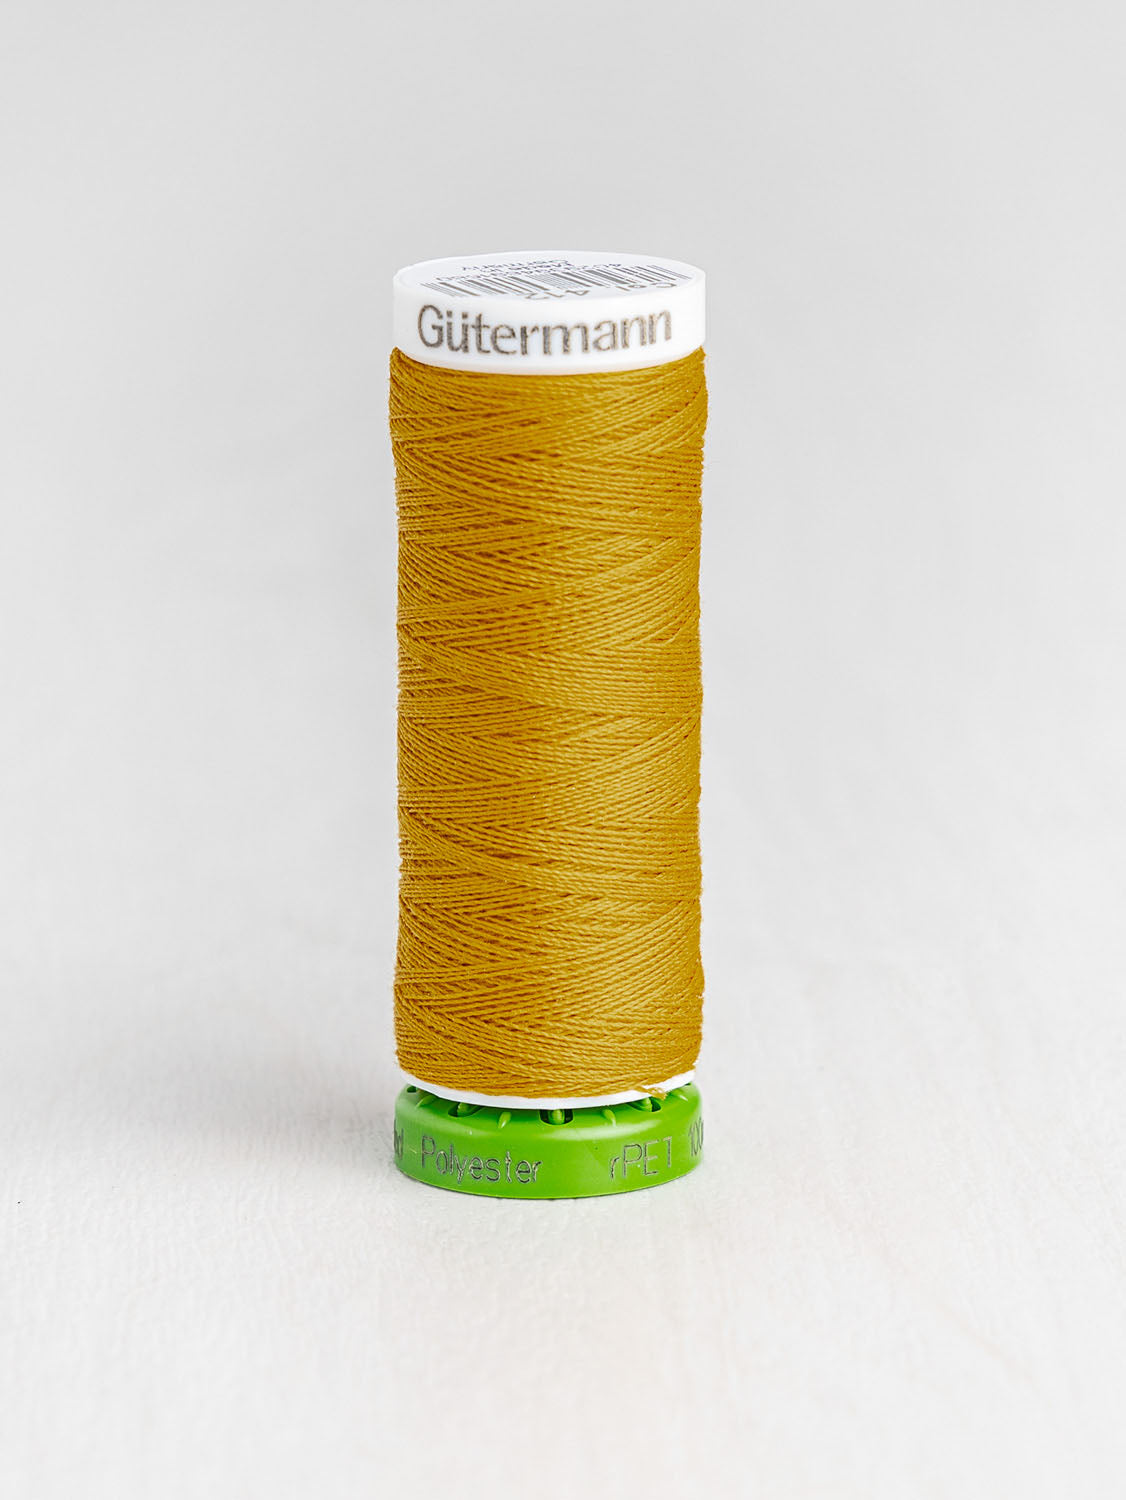 Gütermann All Purpose rPET Recycled Thread - Antique Gold 412 | Core Fabrics